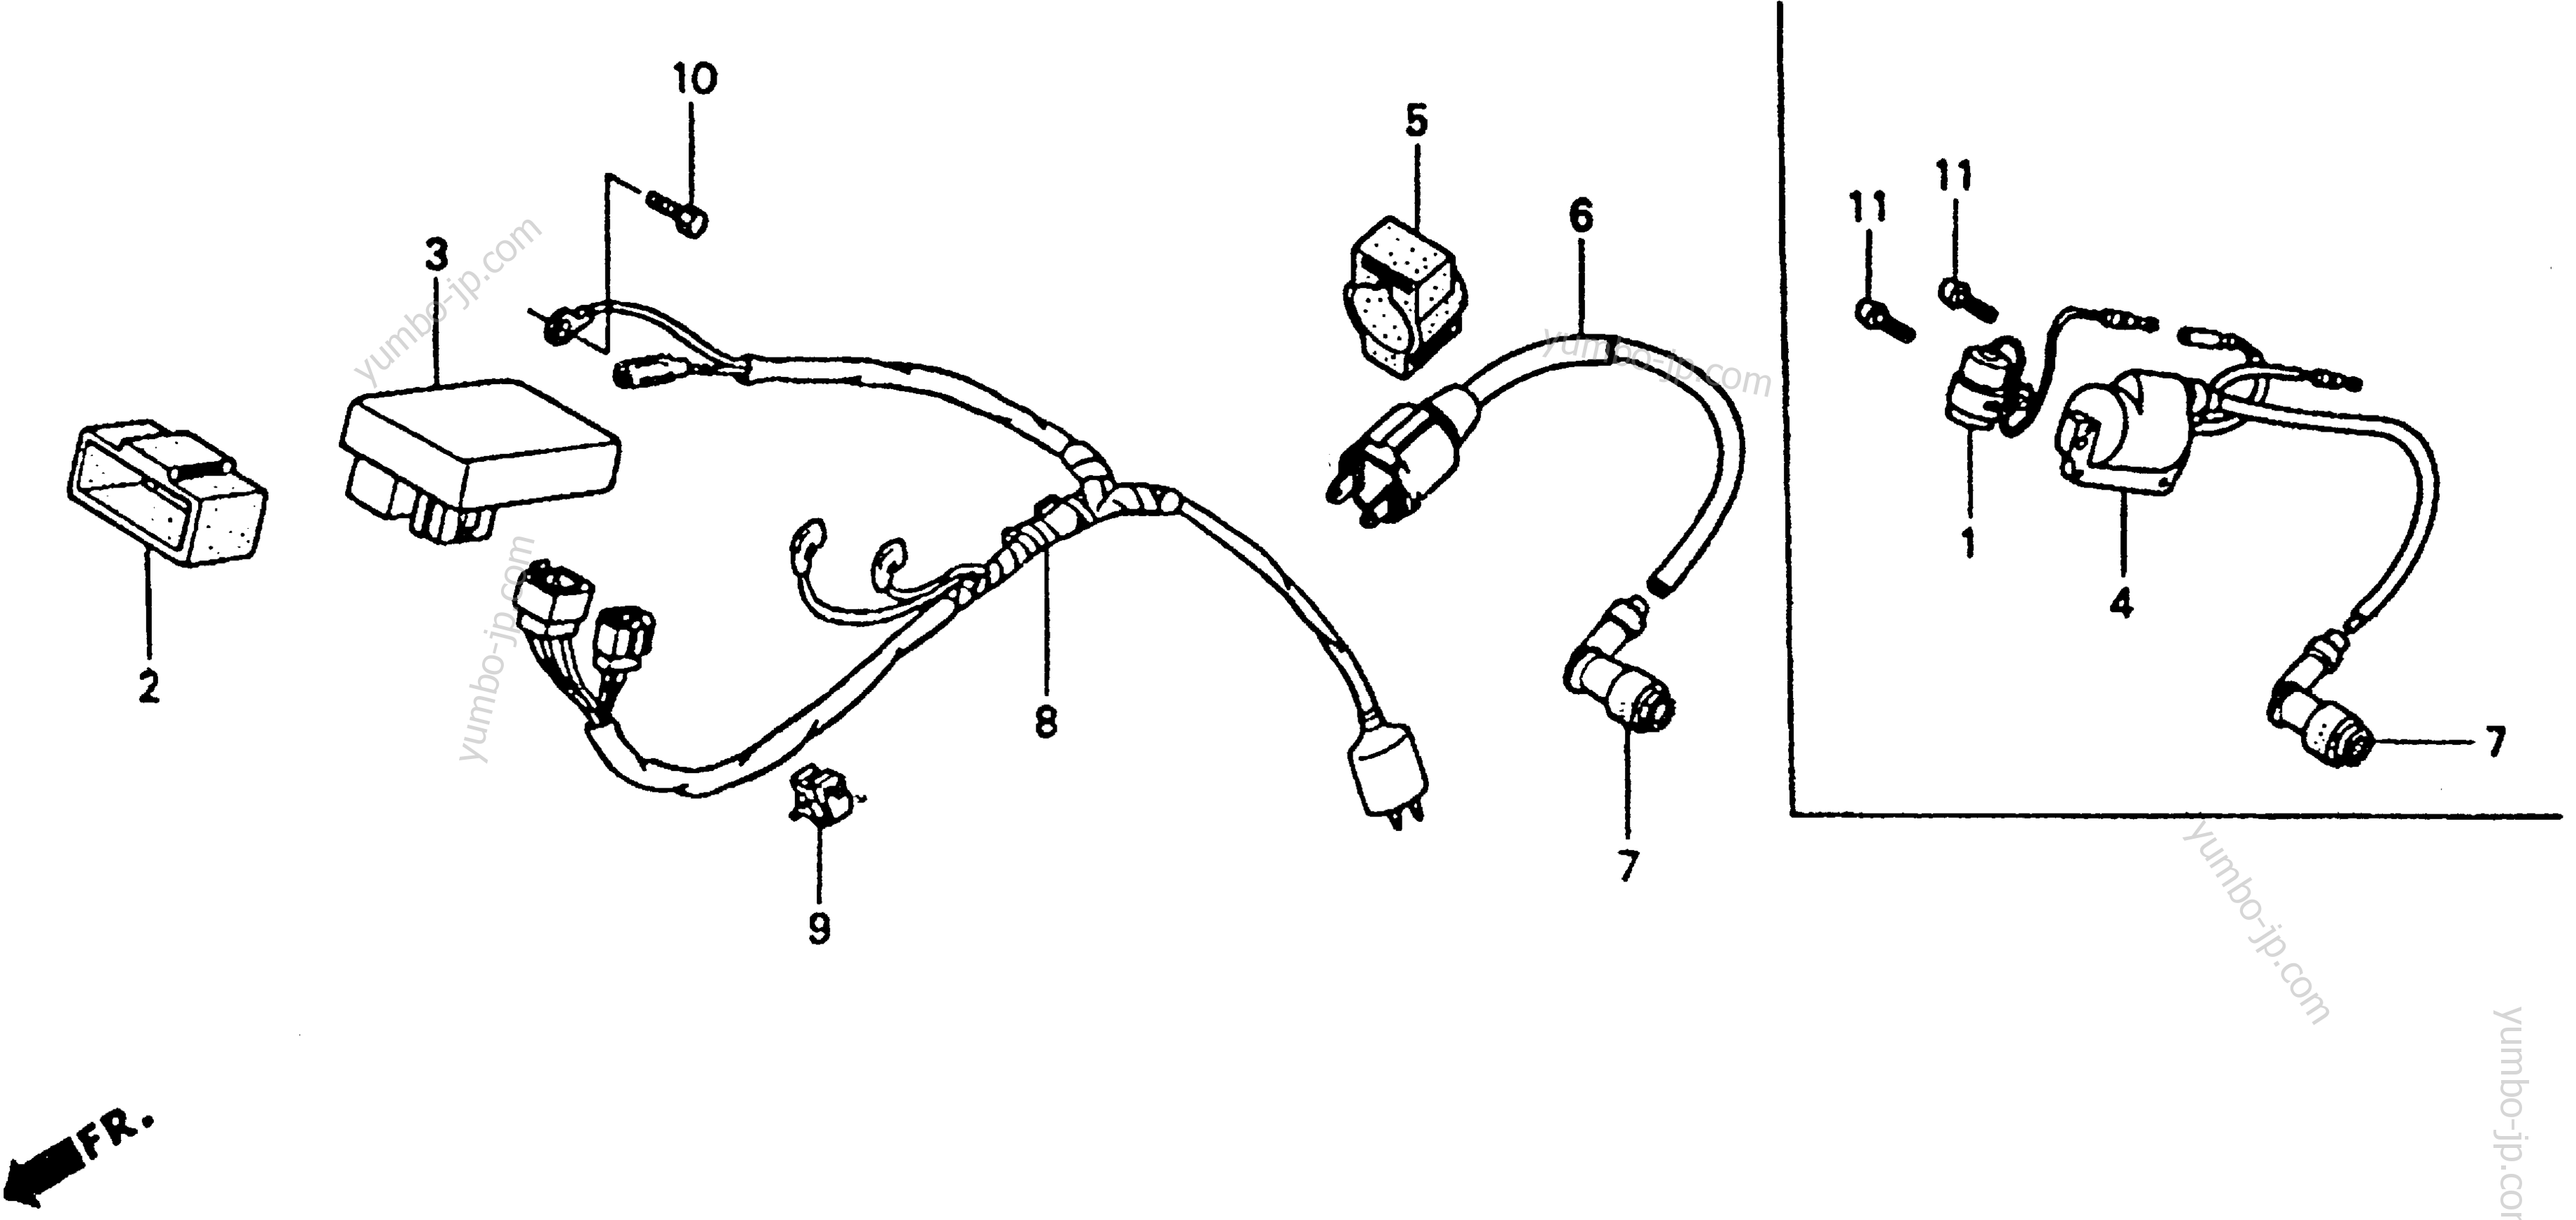 WIRE HARNESS for motorcycles HONDA XR80R A 1987 year